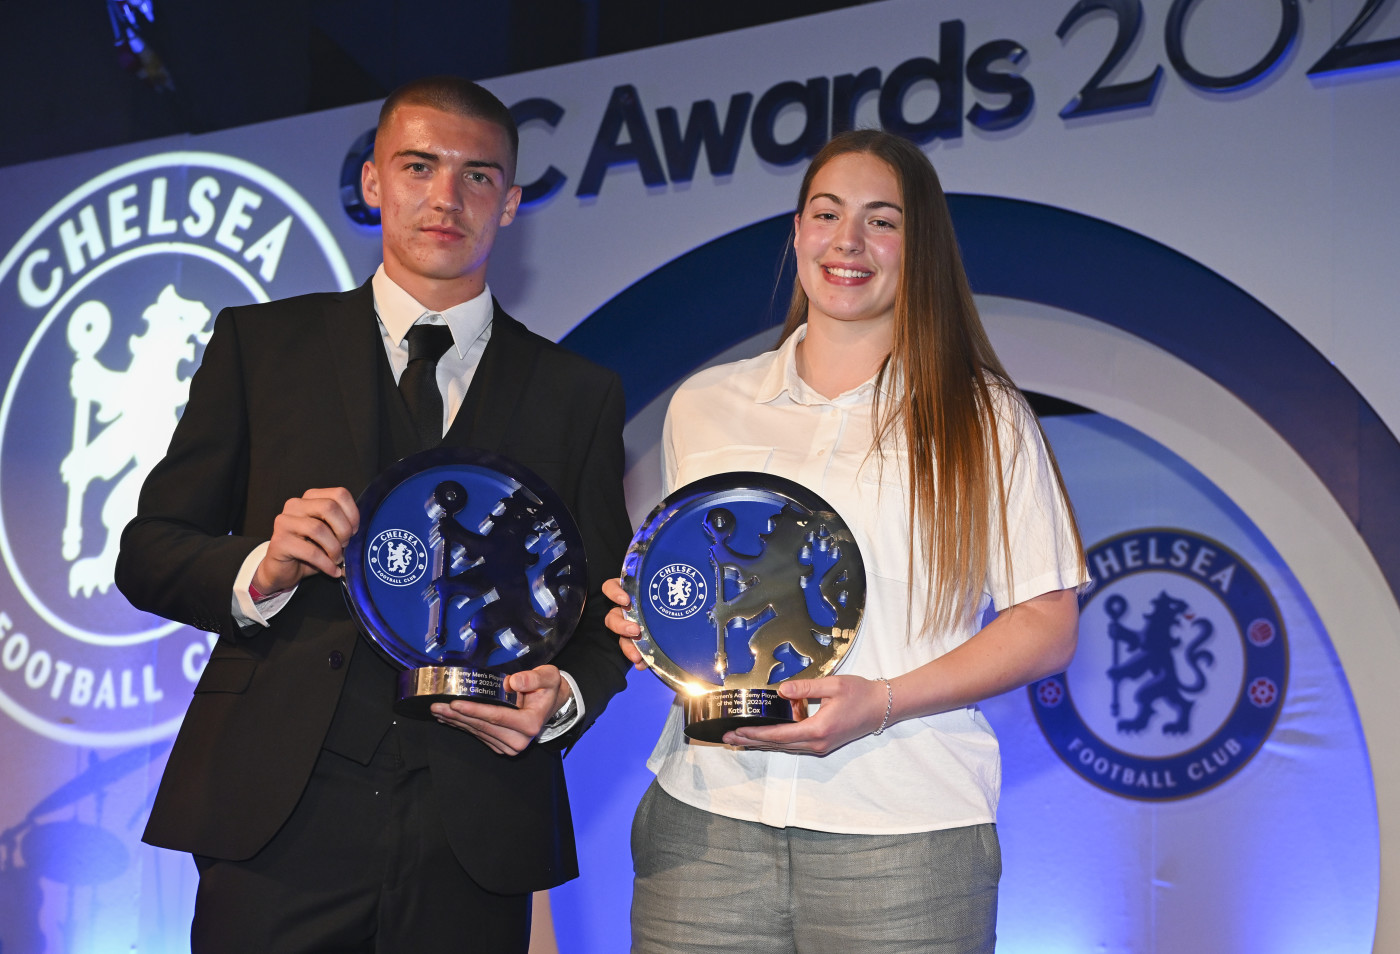 Gilchrist and Cox collecting their awards for Men and Women's Academy Players of the Season respectively